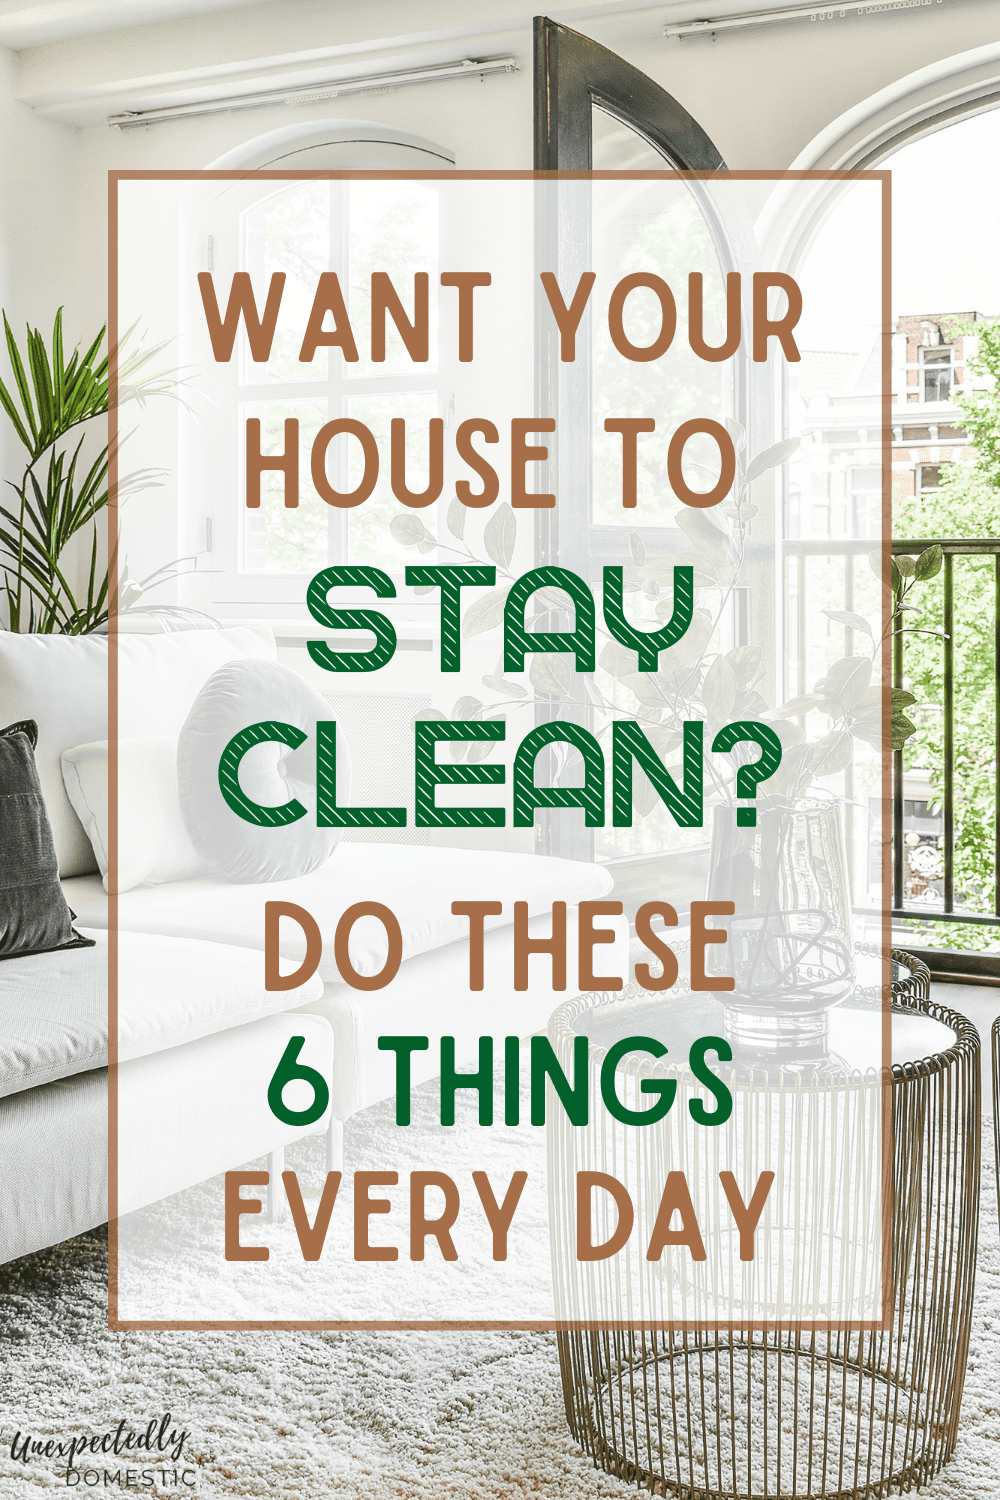 Want to keep your house clean ALL the time? Check out these awesome cleaning hacks! TONS of cleaning house aesthetic and spring cleaning aesthetic. These cleaning tips and tricks will help you make sure your bedroom, bathroom, and kitchen are always clean. Lazy Girl housekeeping life hacks 101! How to remove that overwhelmed messy house feeling, which is life changing! These helpful hints are everything you need to know.